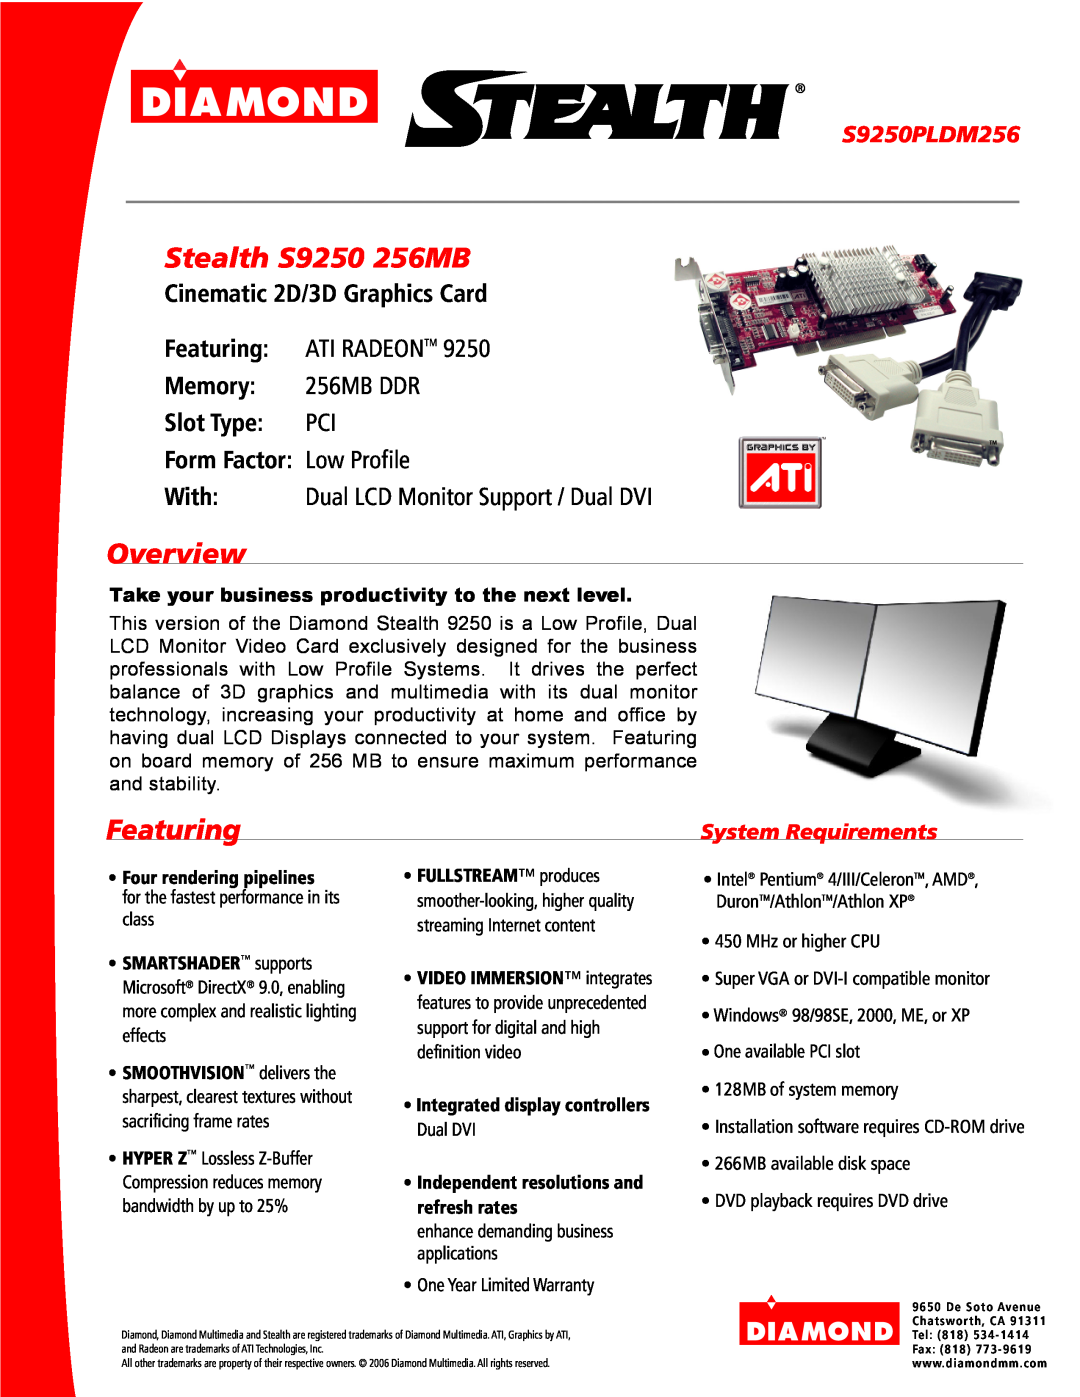 Diamond Multimedia warranty Stealth S9250 256MB, Overview, Featuring, Cinematic 2D/3D Graphics Card, Ati Radeon Tm 